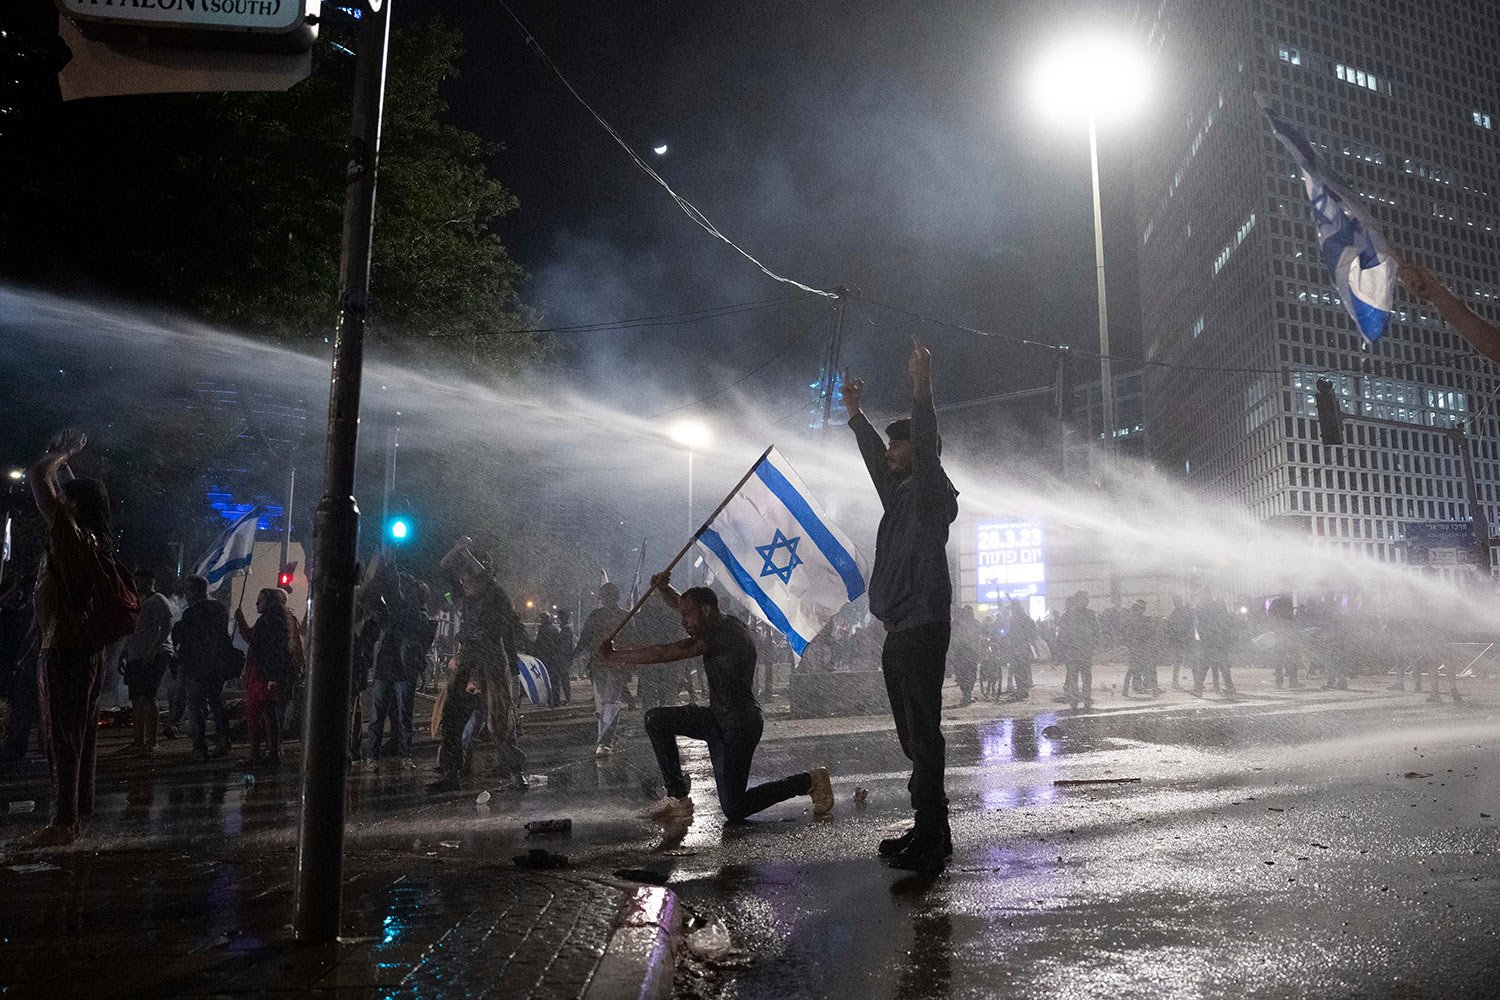  Israeli police use a water cannon to disperse demonstrators blocking a road during a protest against plans by Prime Minister Benjamin Netanyahu's government to overhaul the judicial system, in Tel Aviv, Israel, Monday, March 27, 2023. (AP Photo/Oded